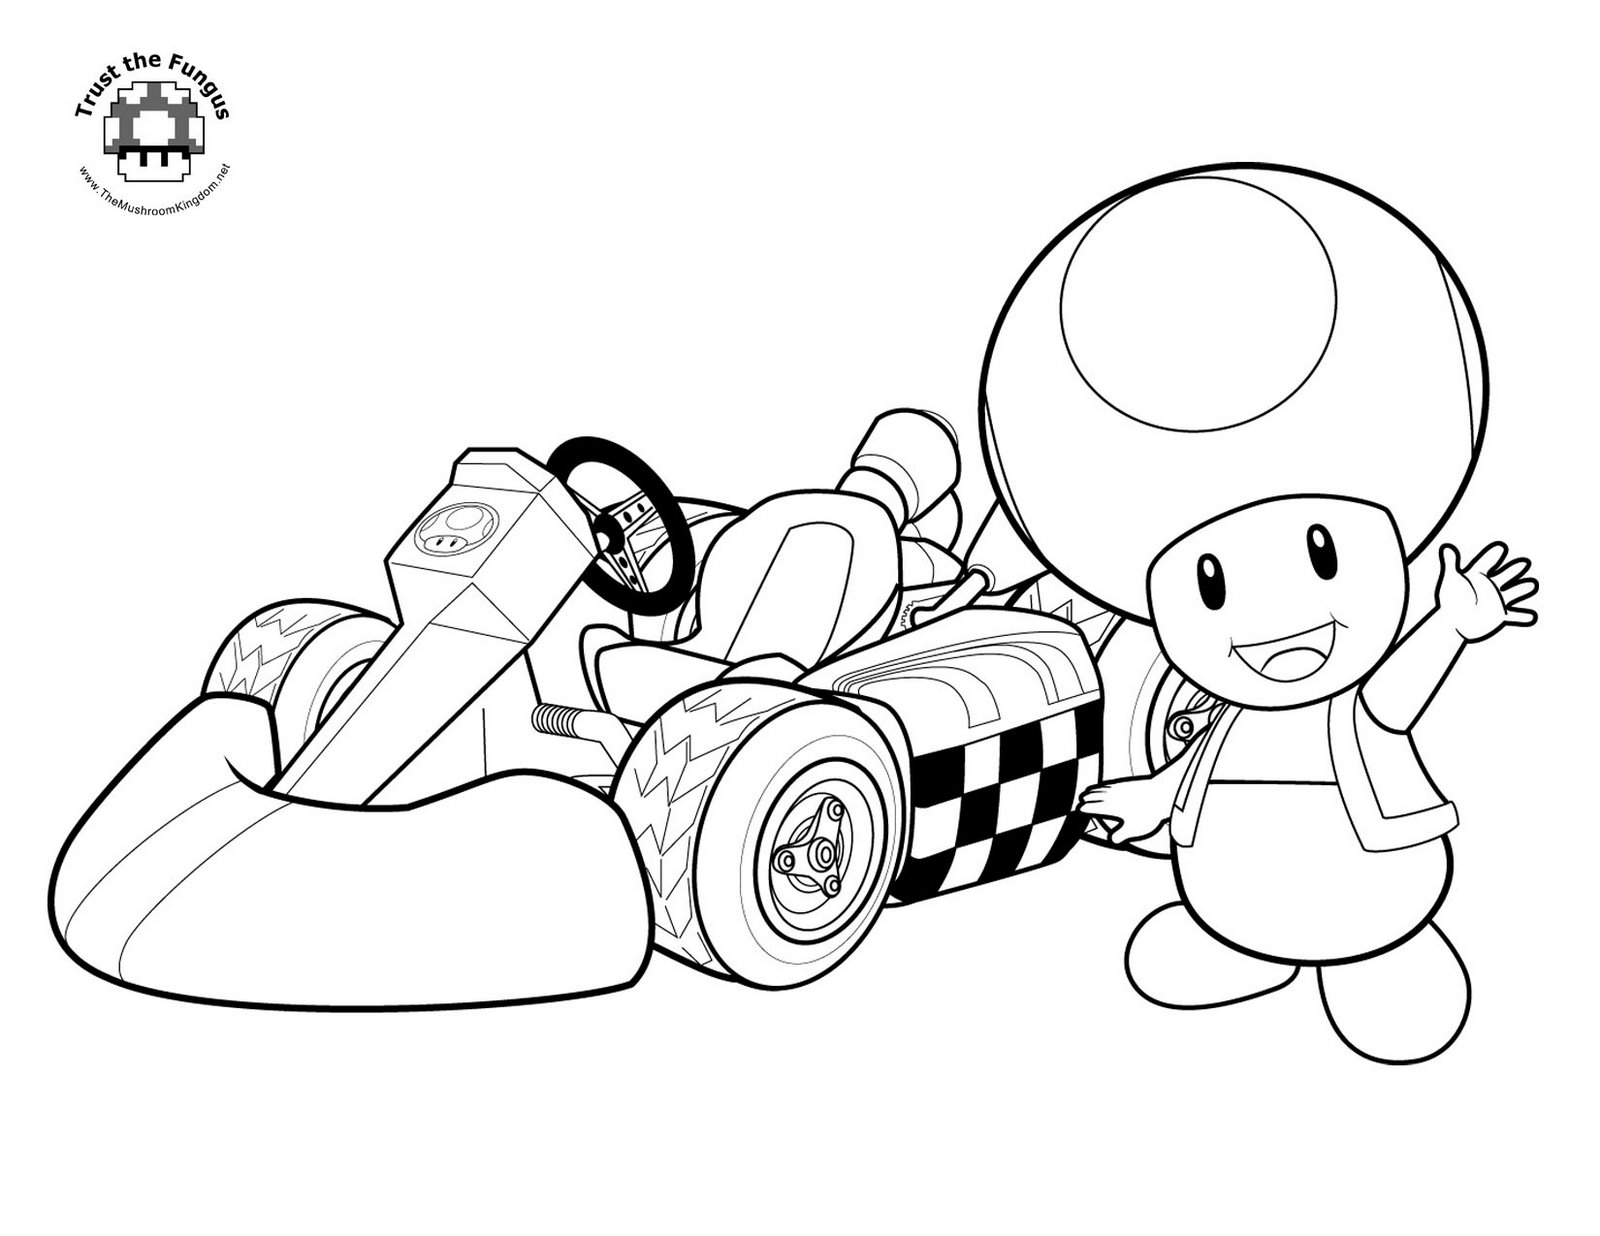 Toad Mario Kart coloring page - free printable coloring pages on coloori.com